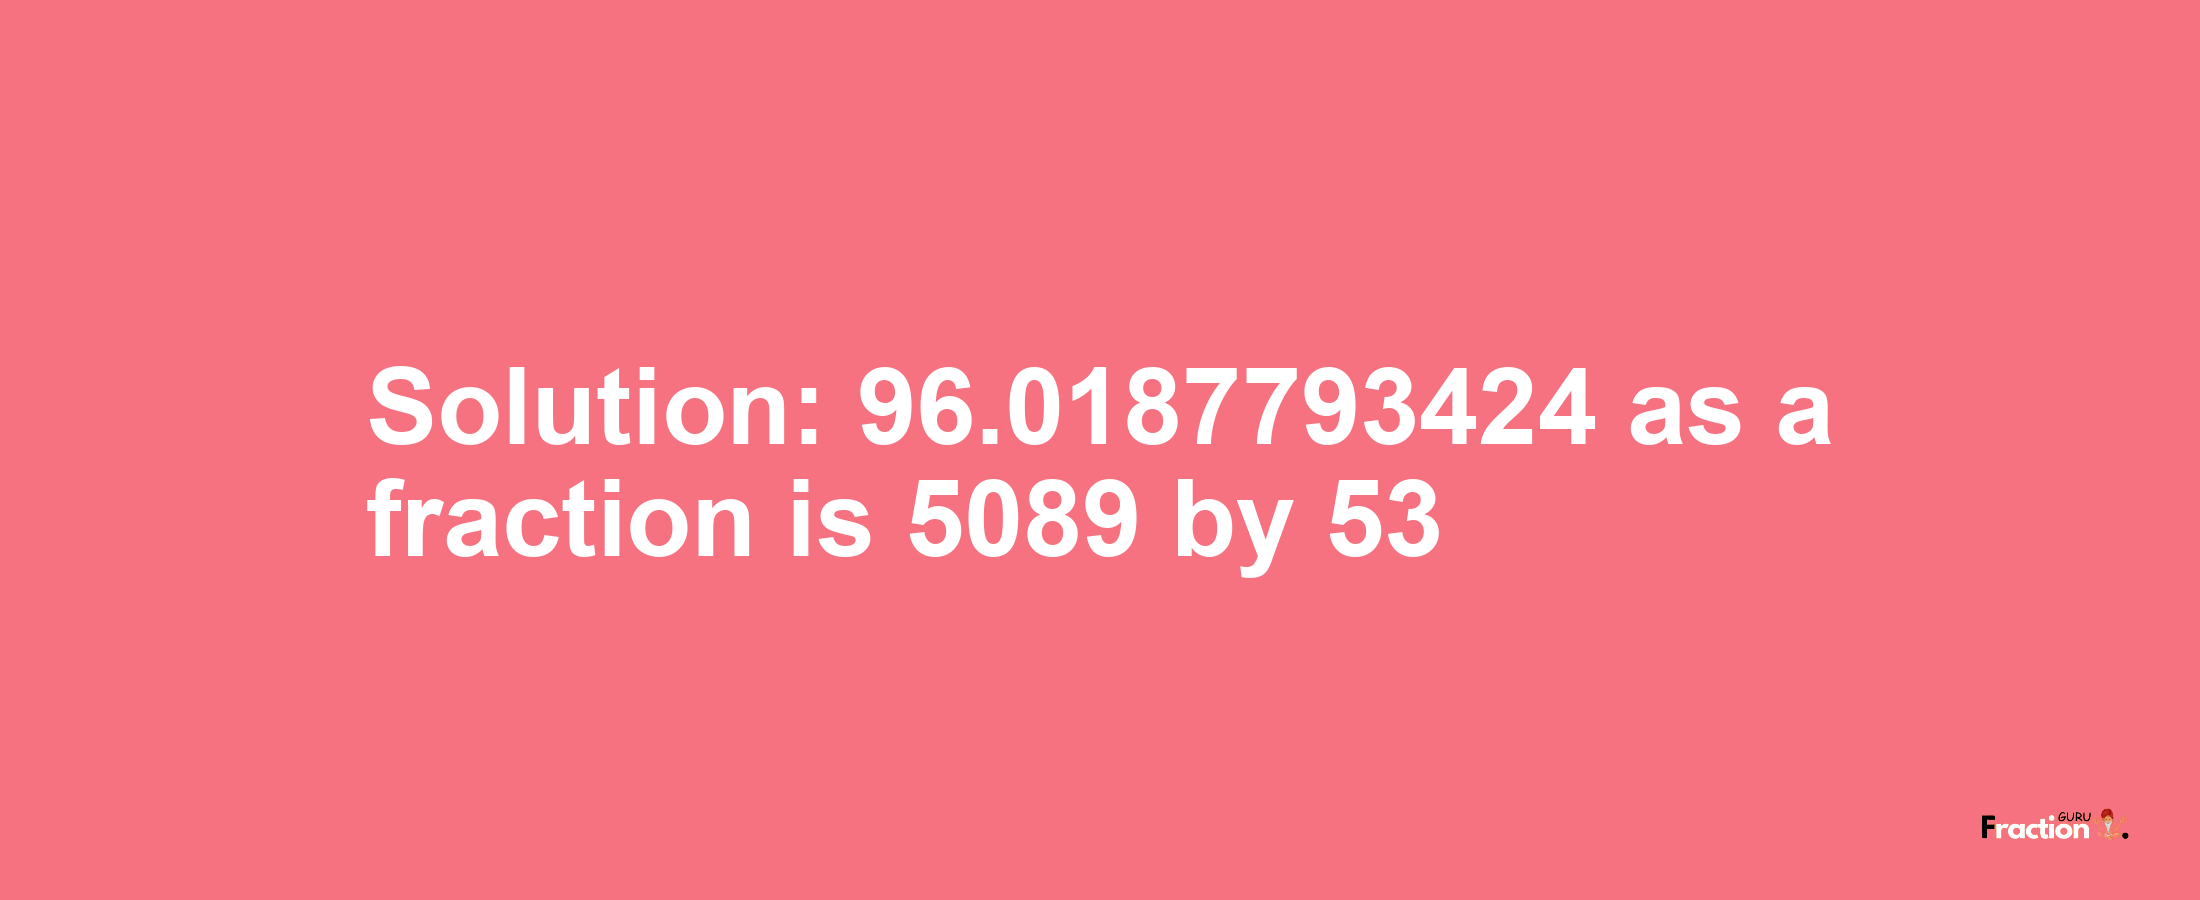 Solution:96.0187793424 as a fraction is 5089/53